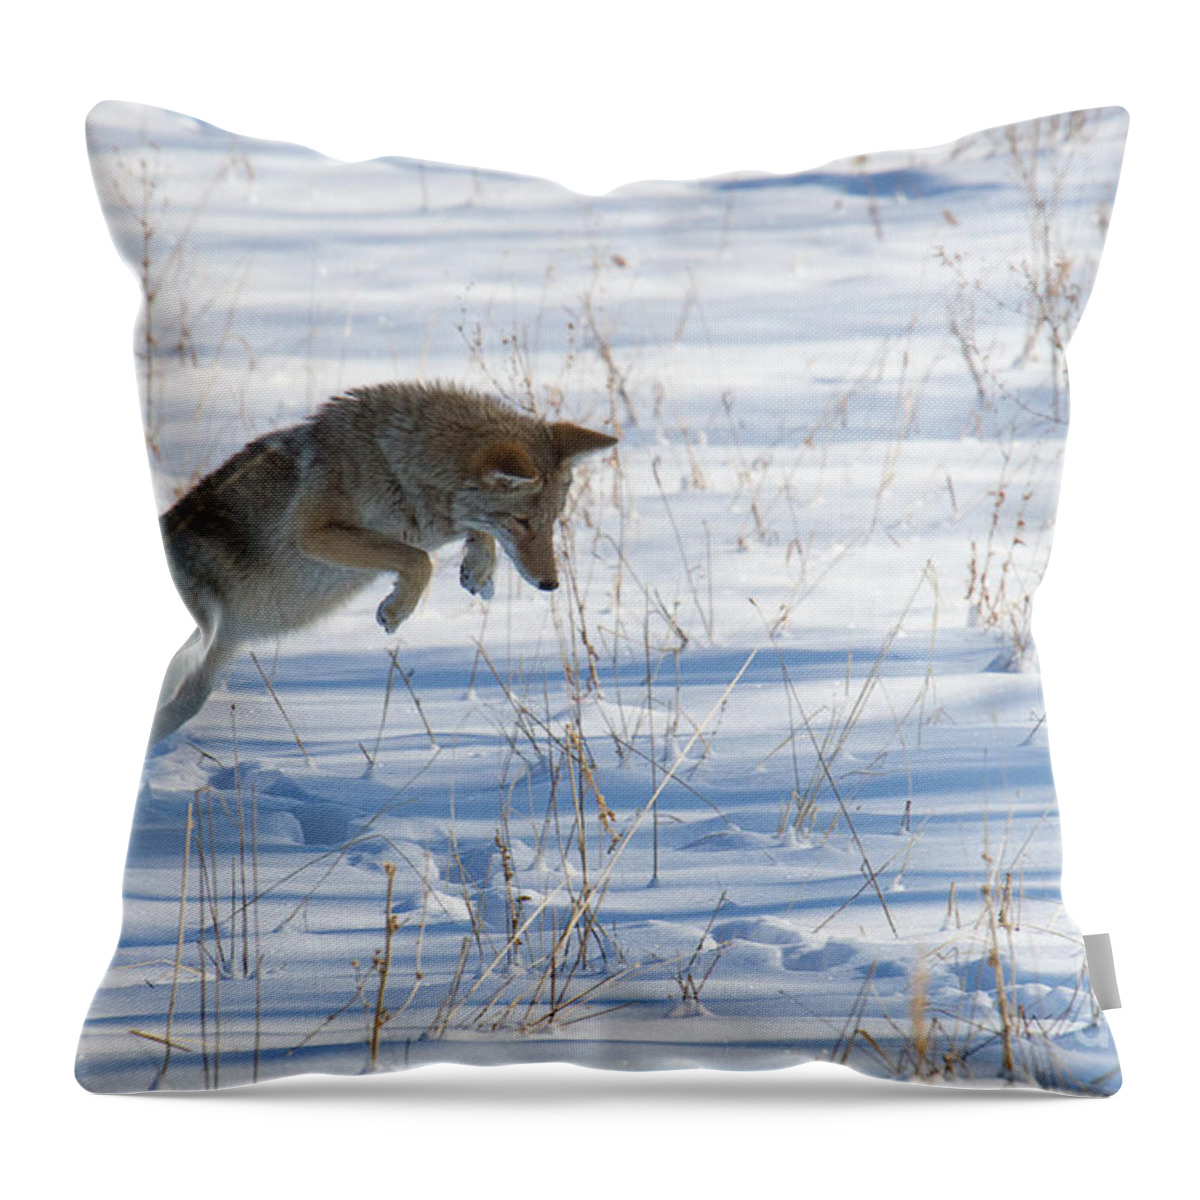 Blurred Throw Pillow featuring the photograph Airborne Hunter by Jim Garrison